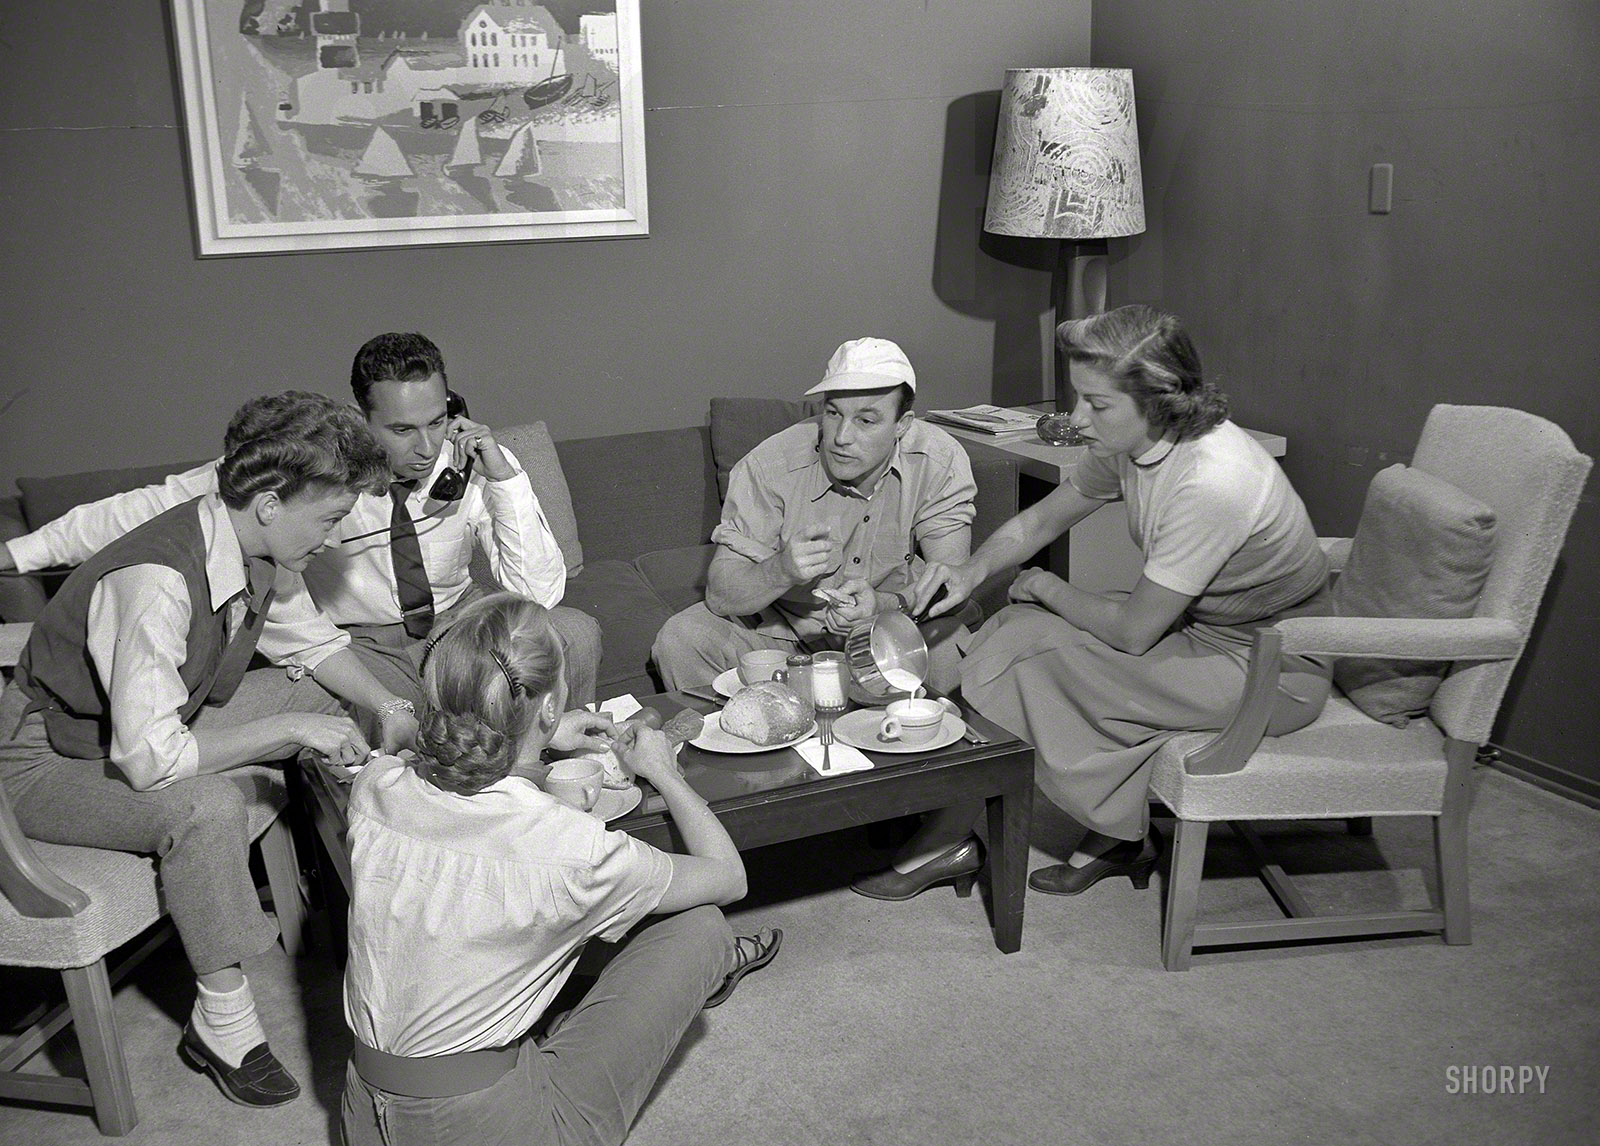 February 1952. "Entertainer Gene Kelly with others having coffee." The star and his satellites. From photos by Maurice Terrell for Look magazine. View full size.